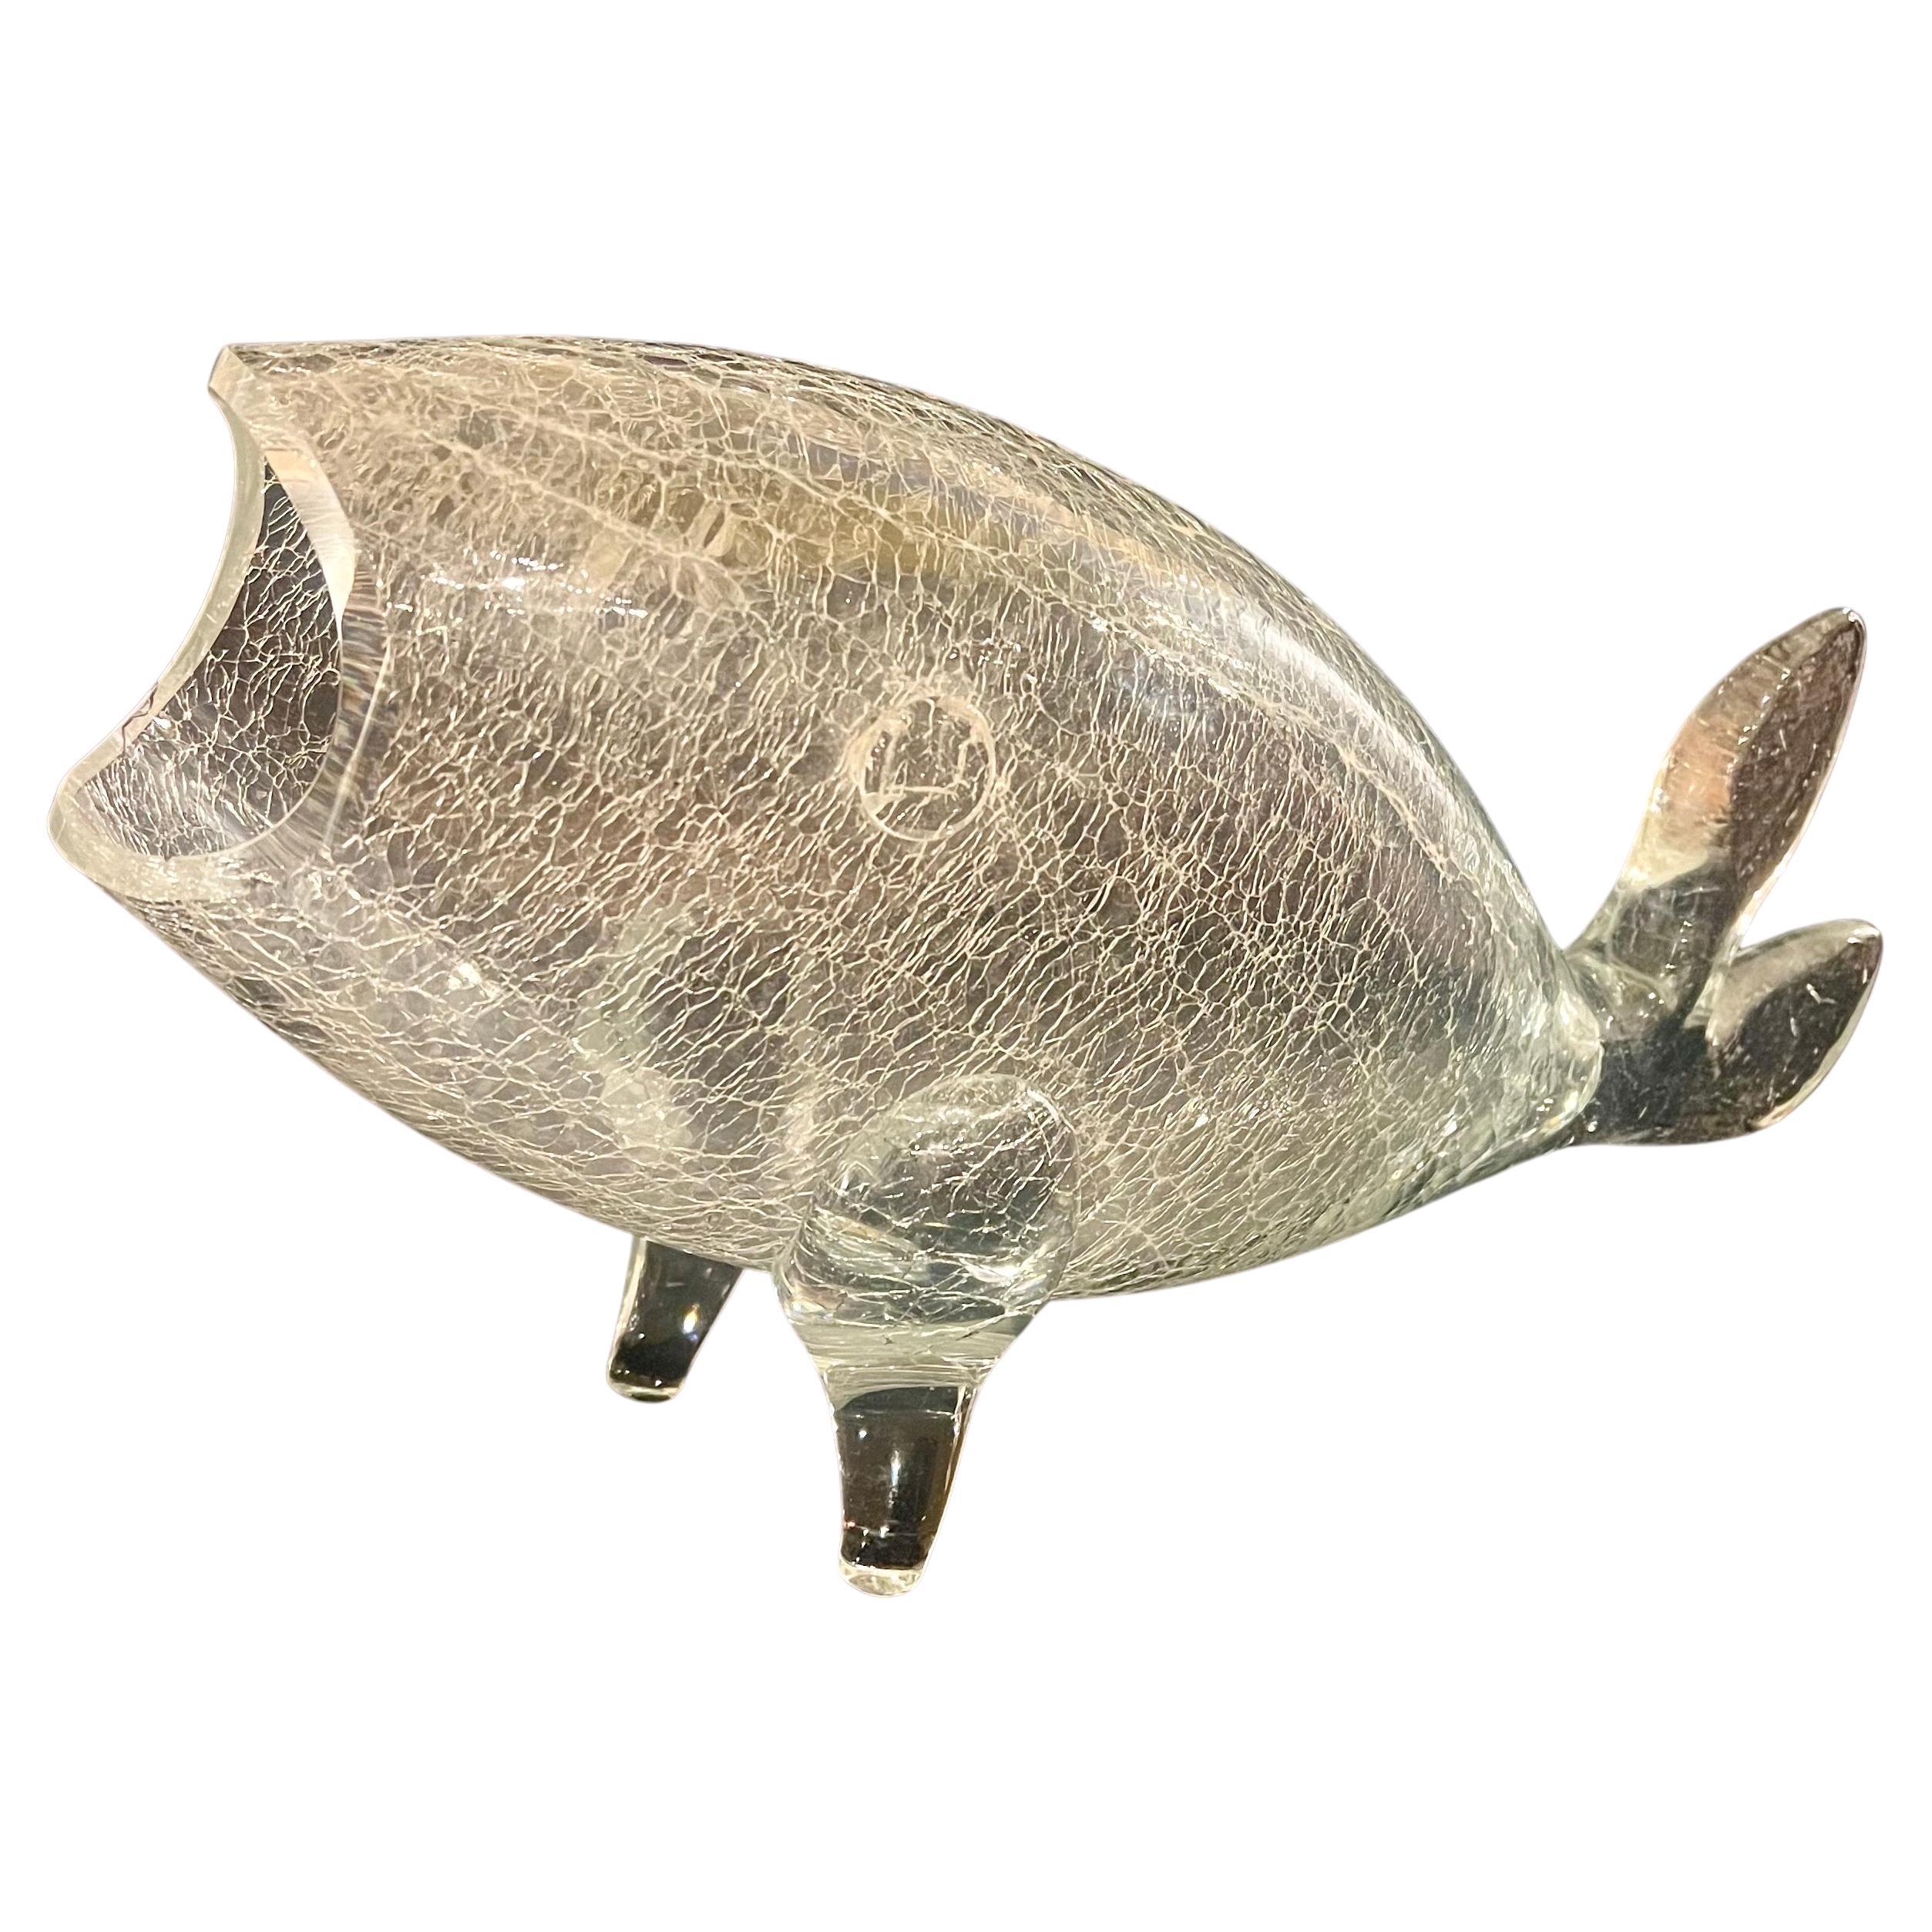 Fun midcentury crackle glass collectible fish vase by Blenko, circa the 1970s. The vase is 16